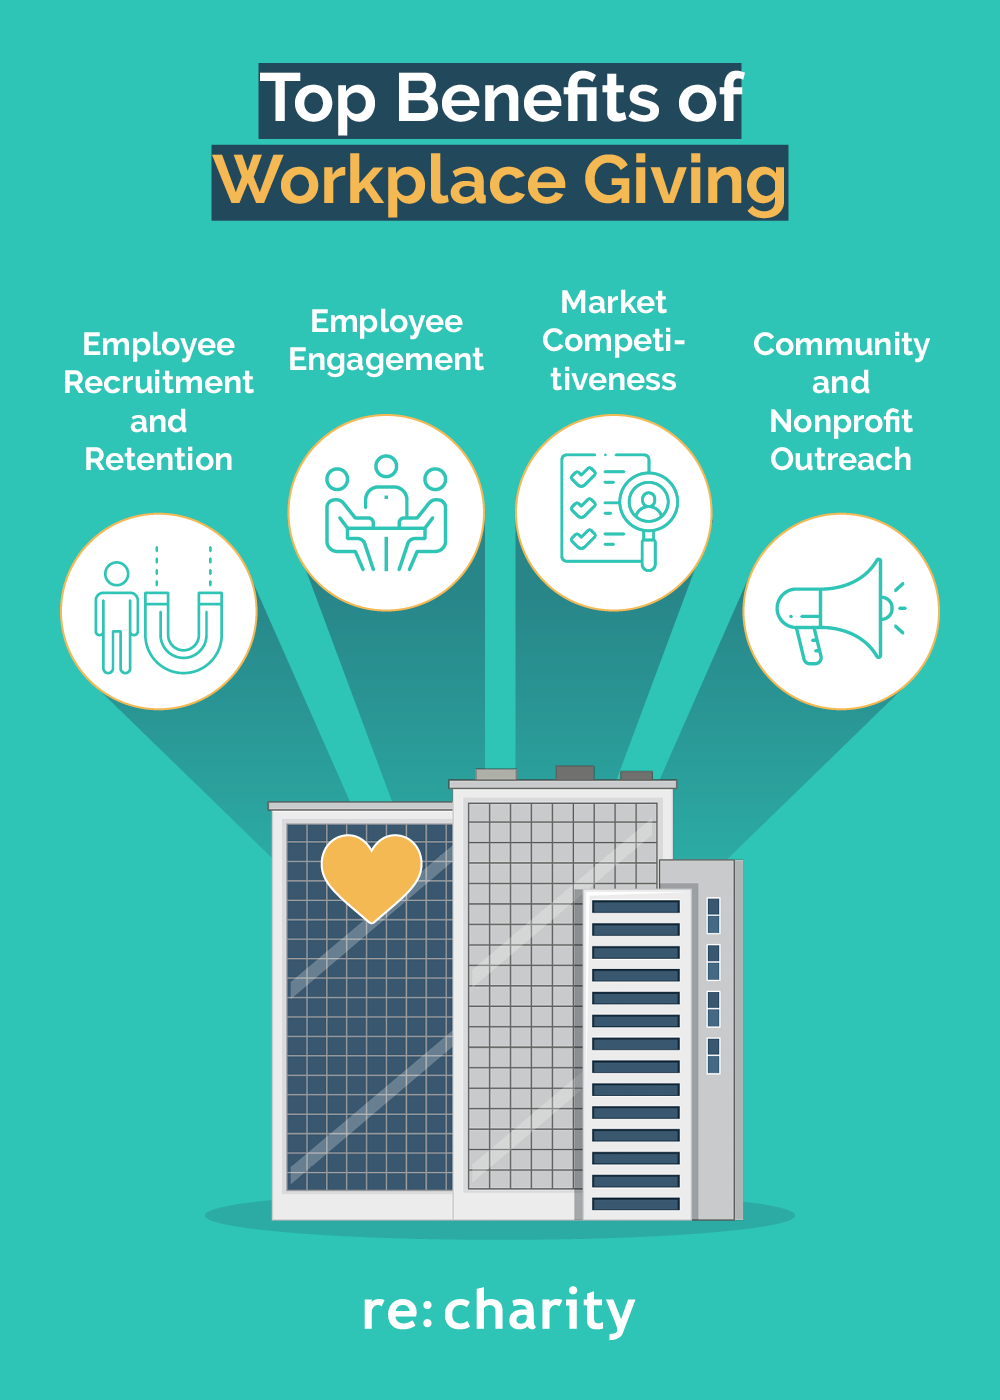 an infographic explaining the top four benefits of workplace giving: employee recruitment and retention, employee engagement, market competitiveness, and community and nonprofit outreach.